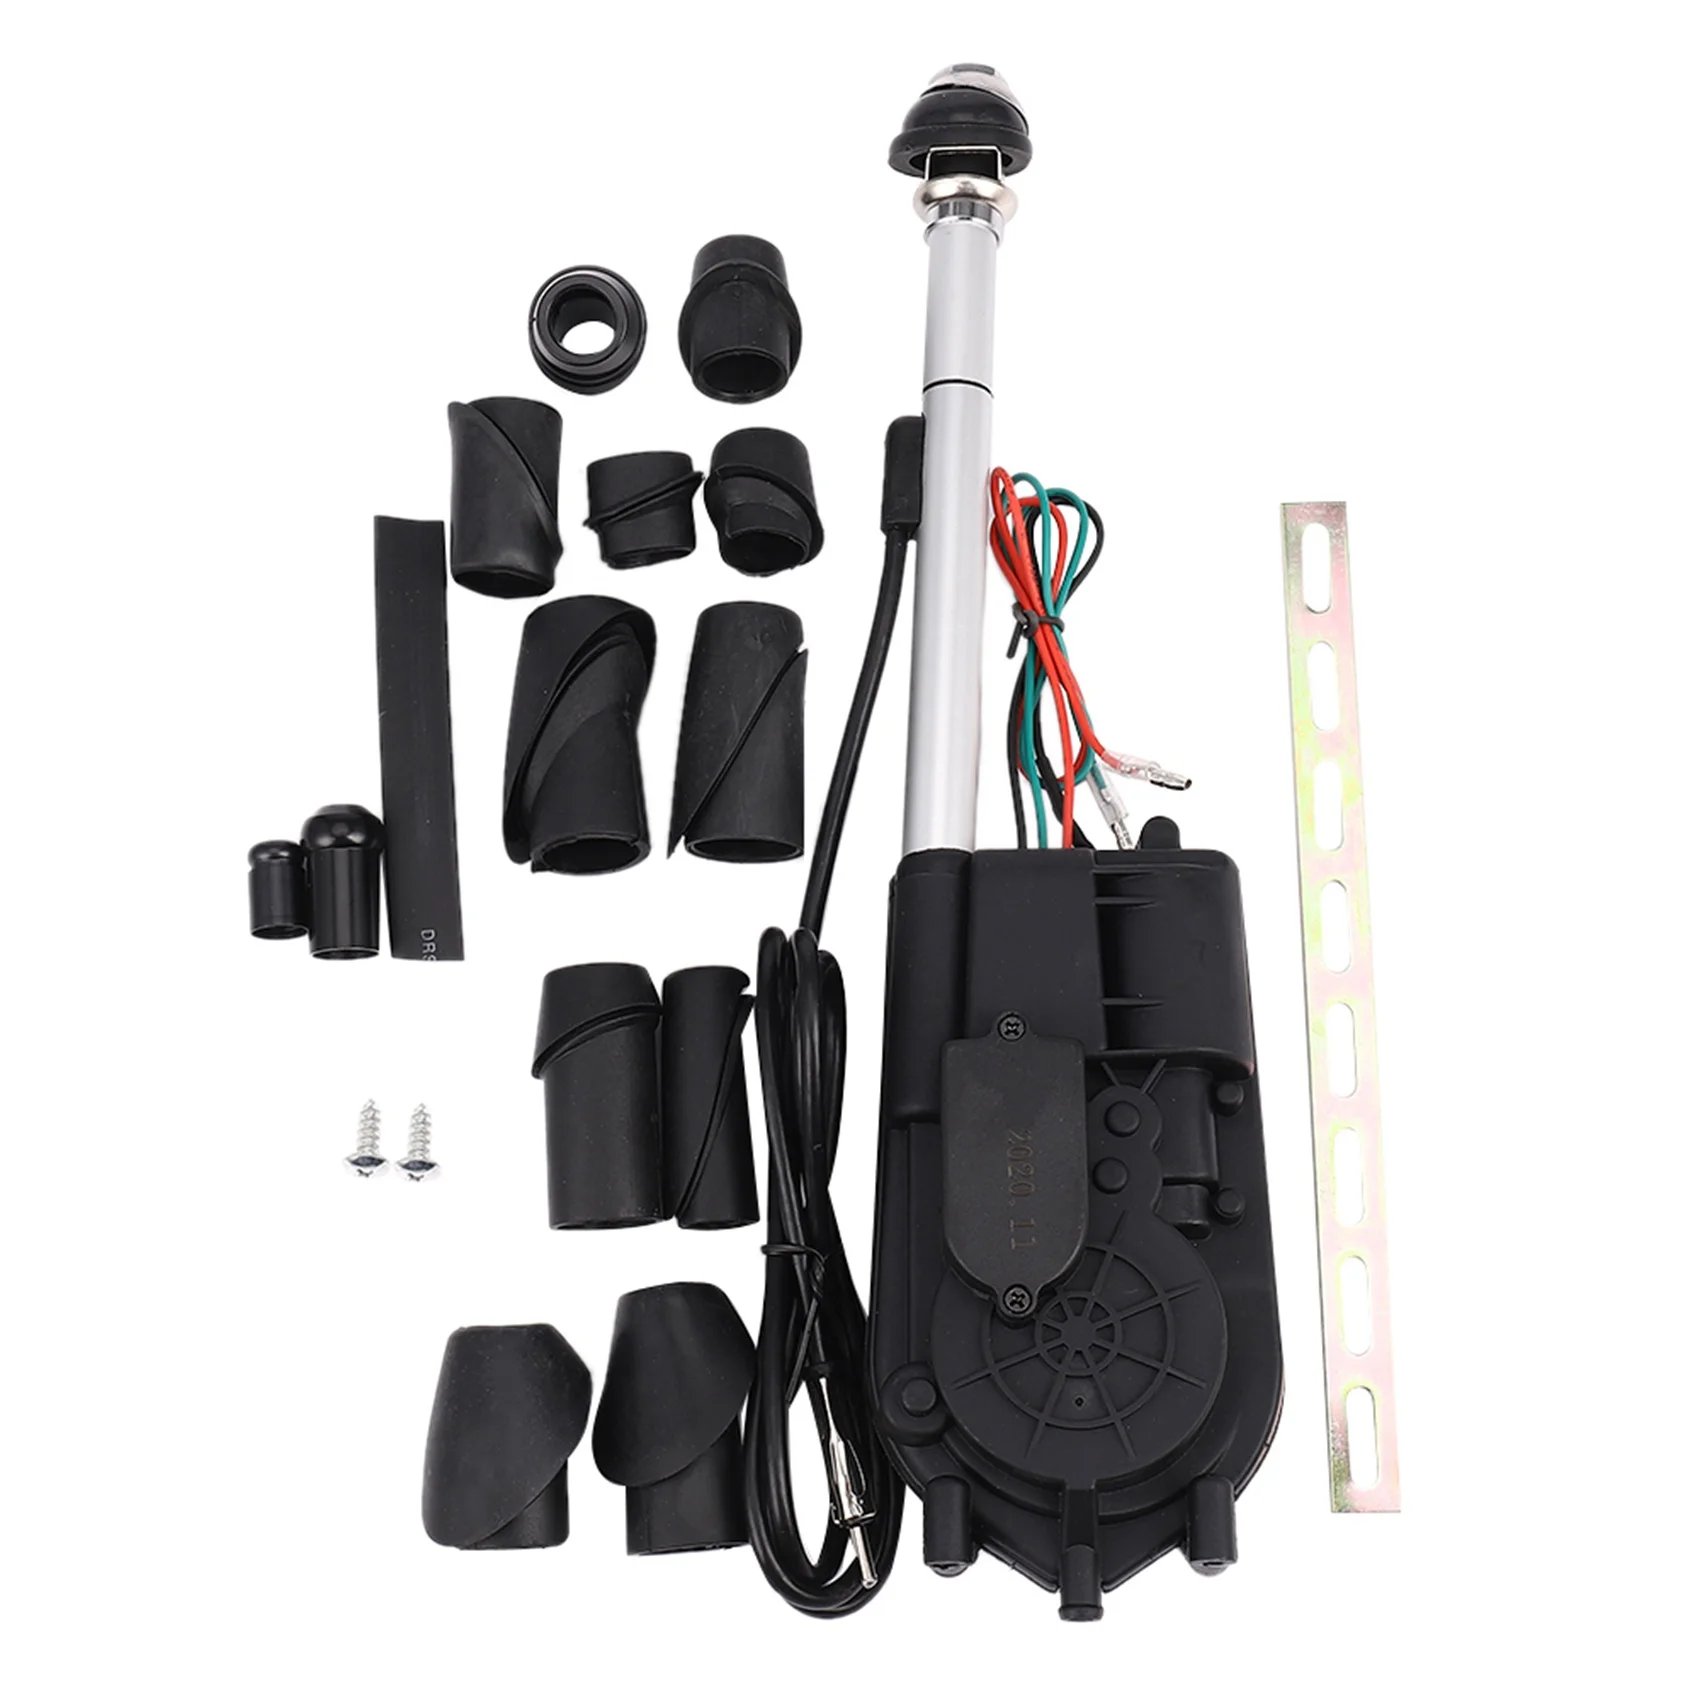 

Universal Car Auto Suv AM FM Radio Electric Power Automatic Antenna Aerial Kit 12V Exterior Vehicle Aerials Pro Auto Replacement